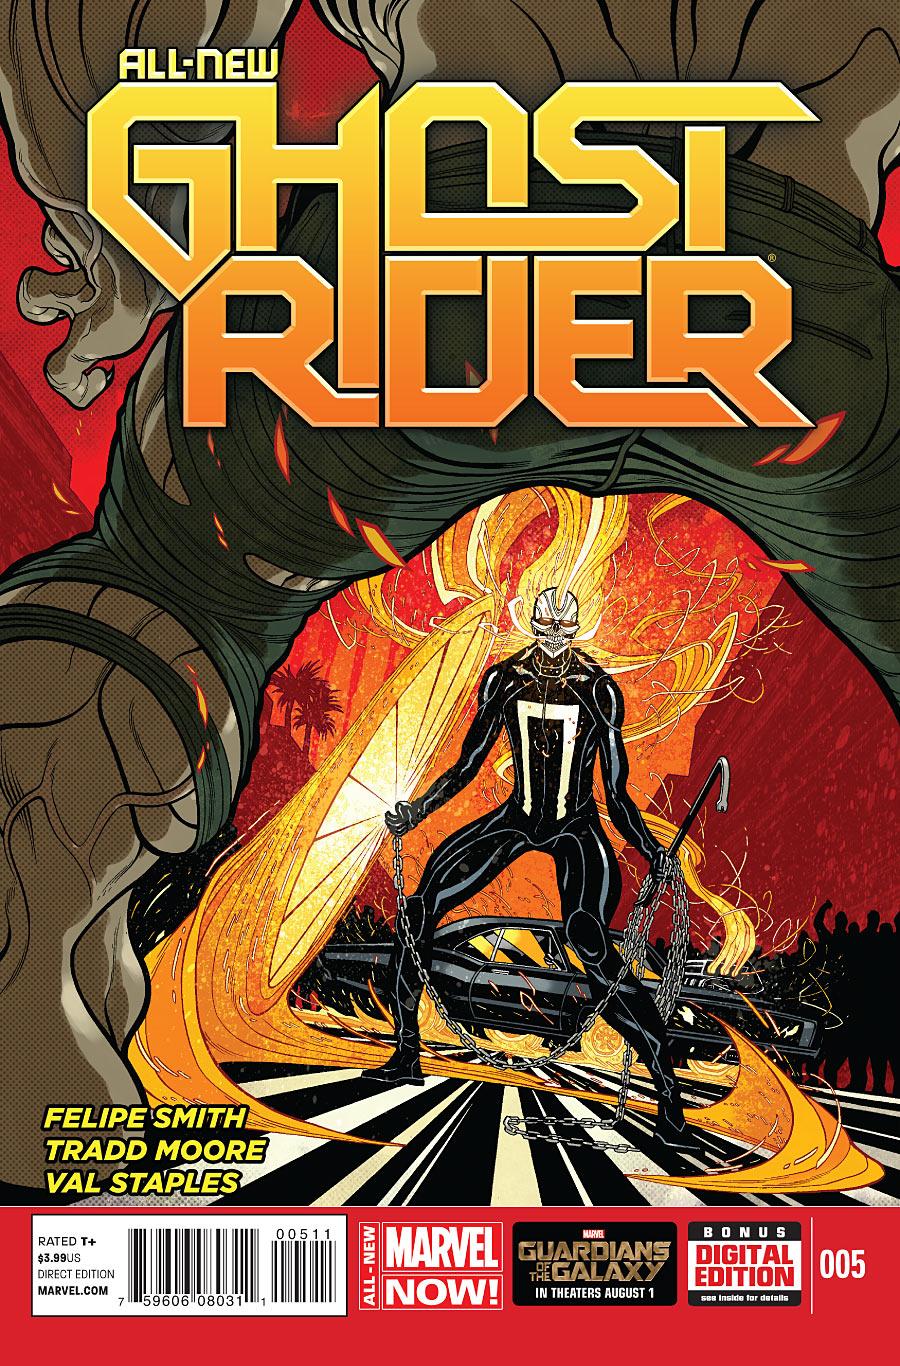 All-New Ghost Rider Vol. 1 #5